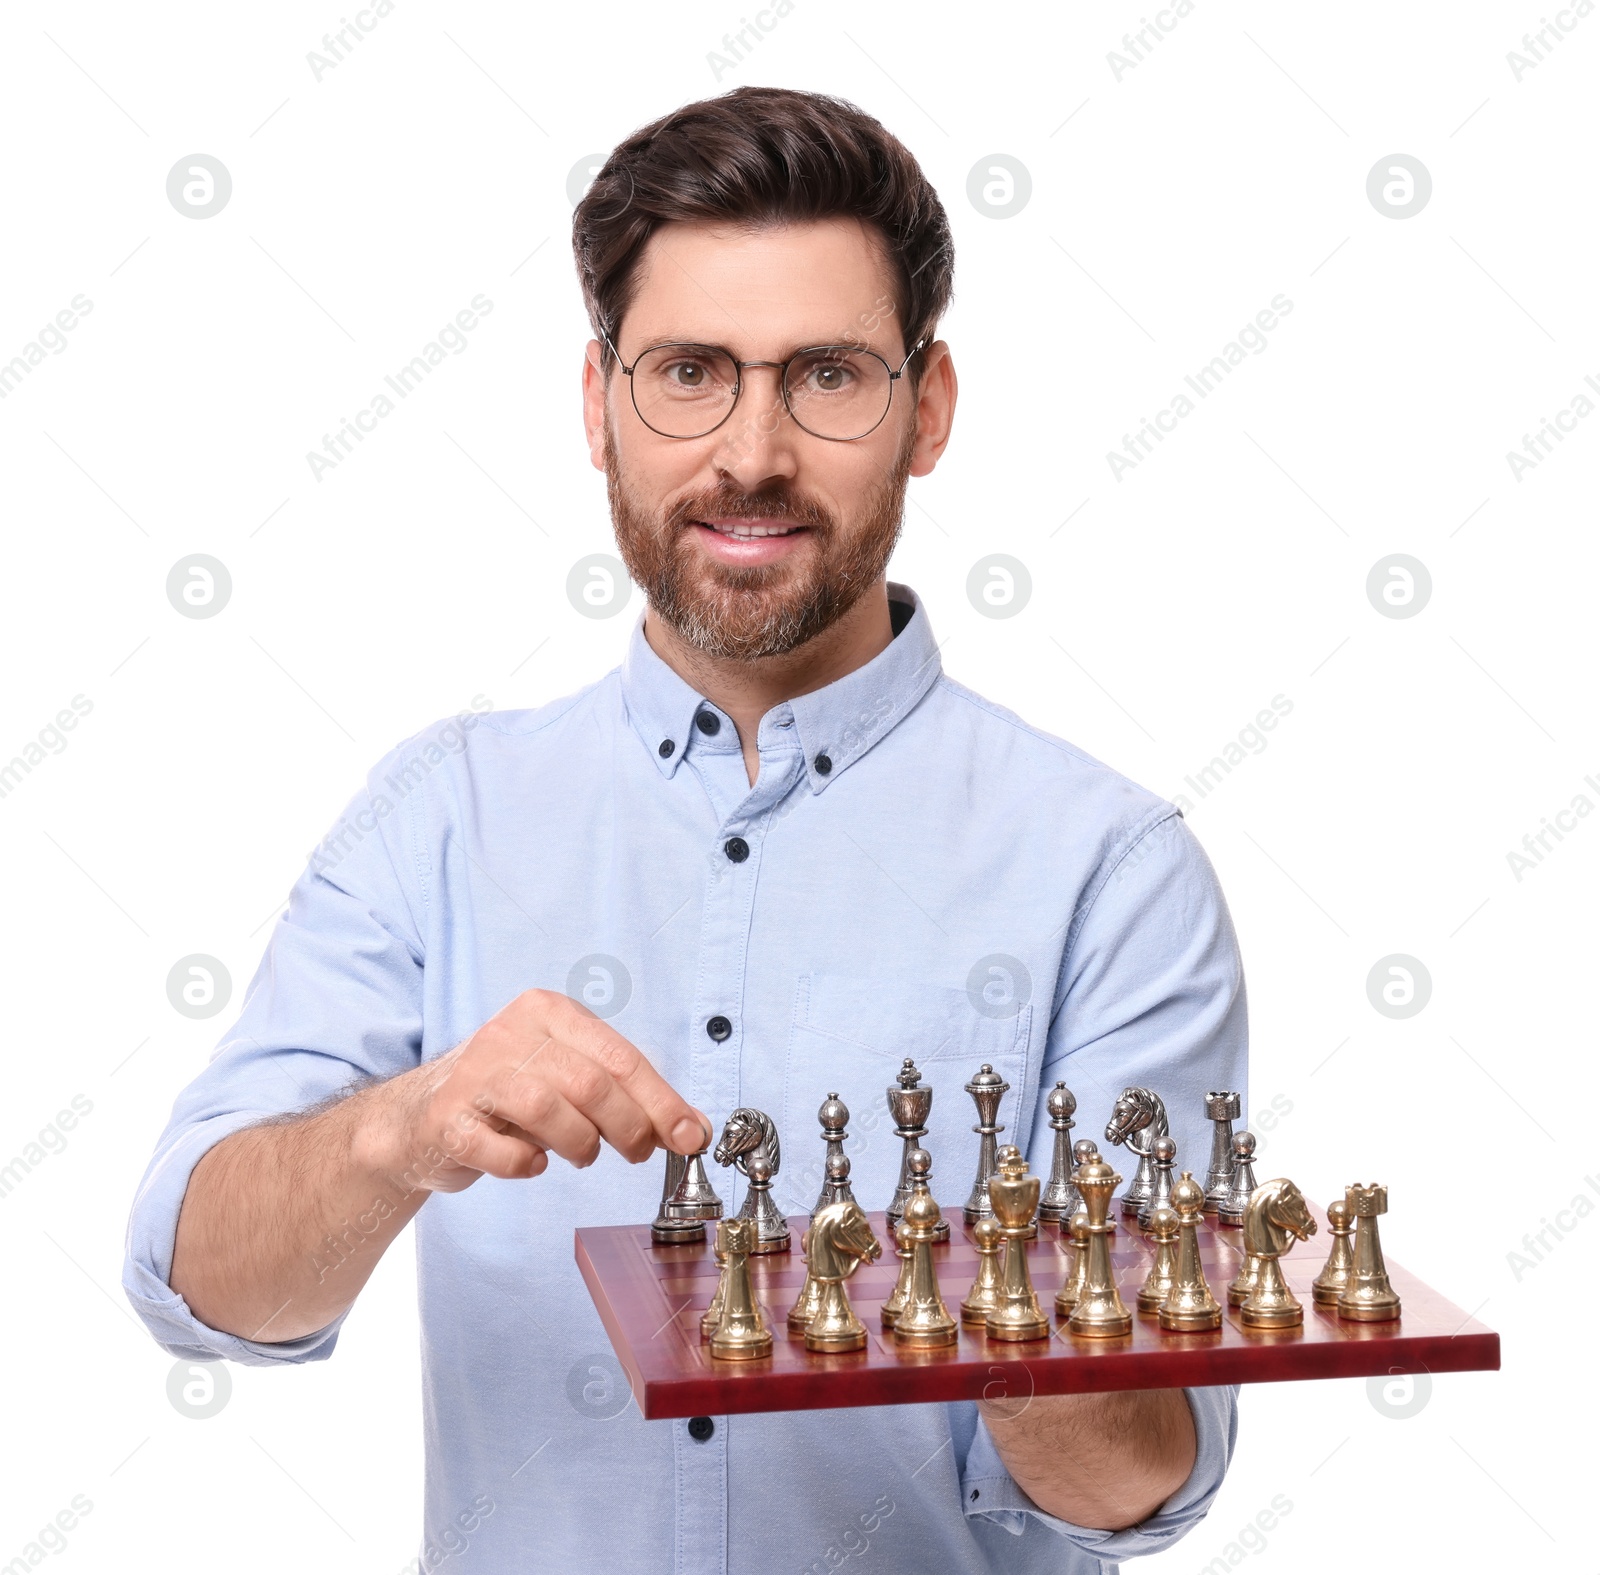 Photo of Handsome man holding chessboard with game pieces on white background